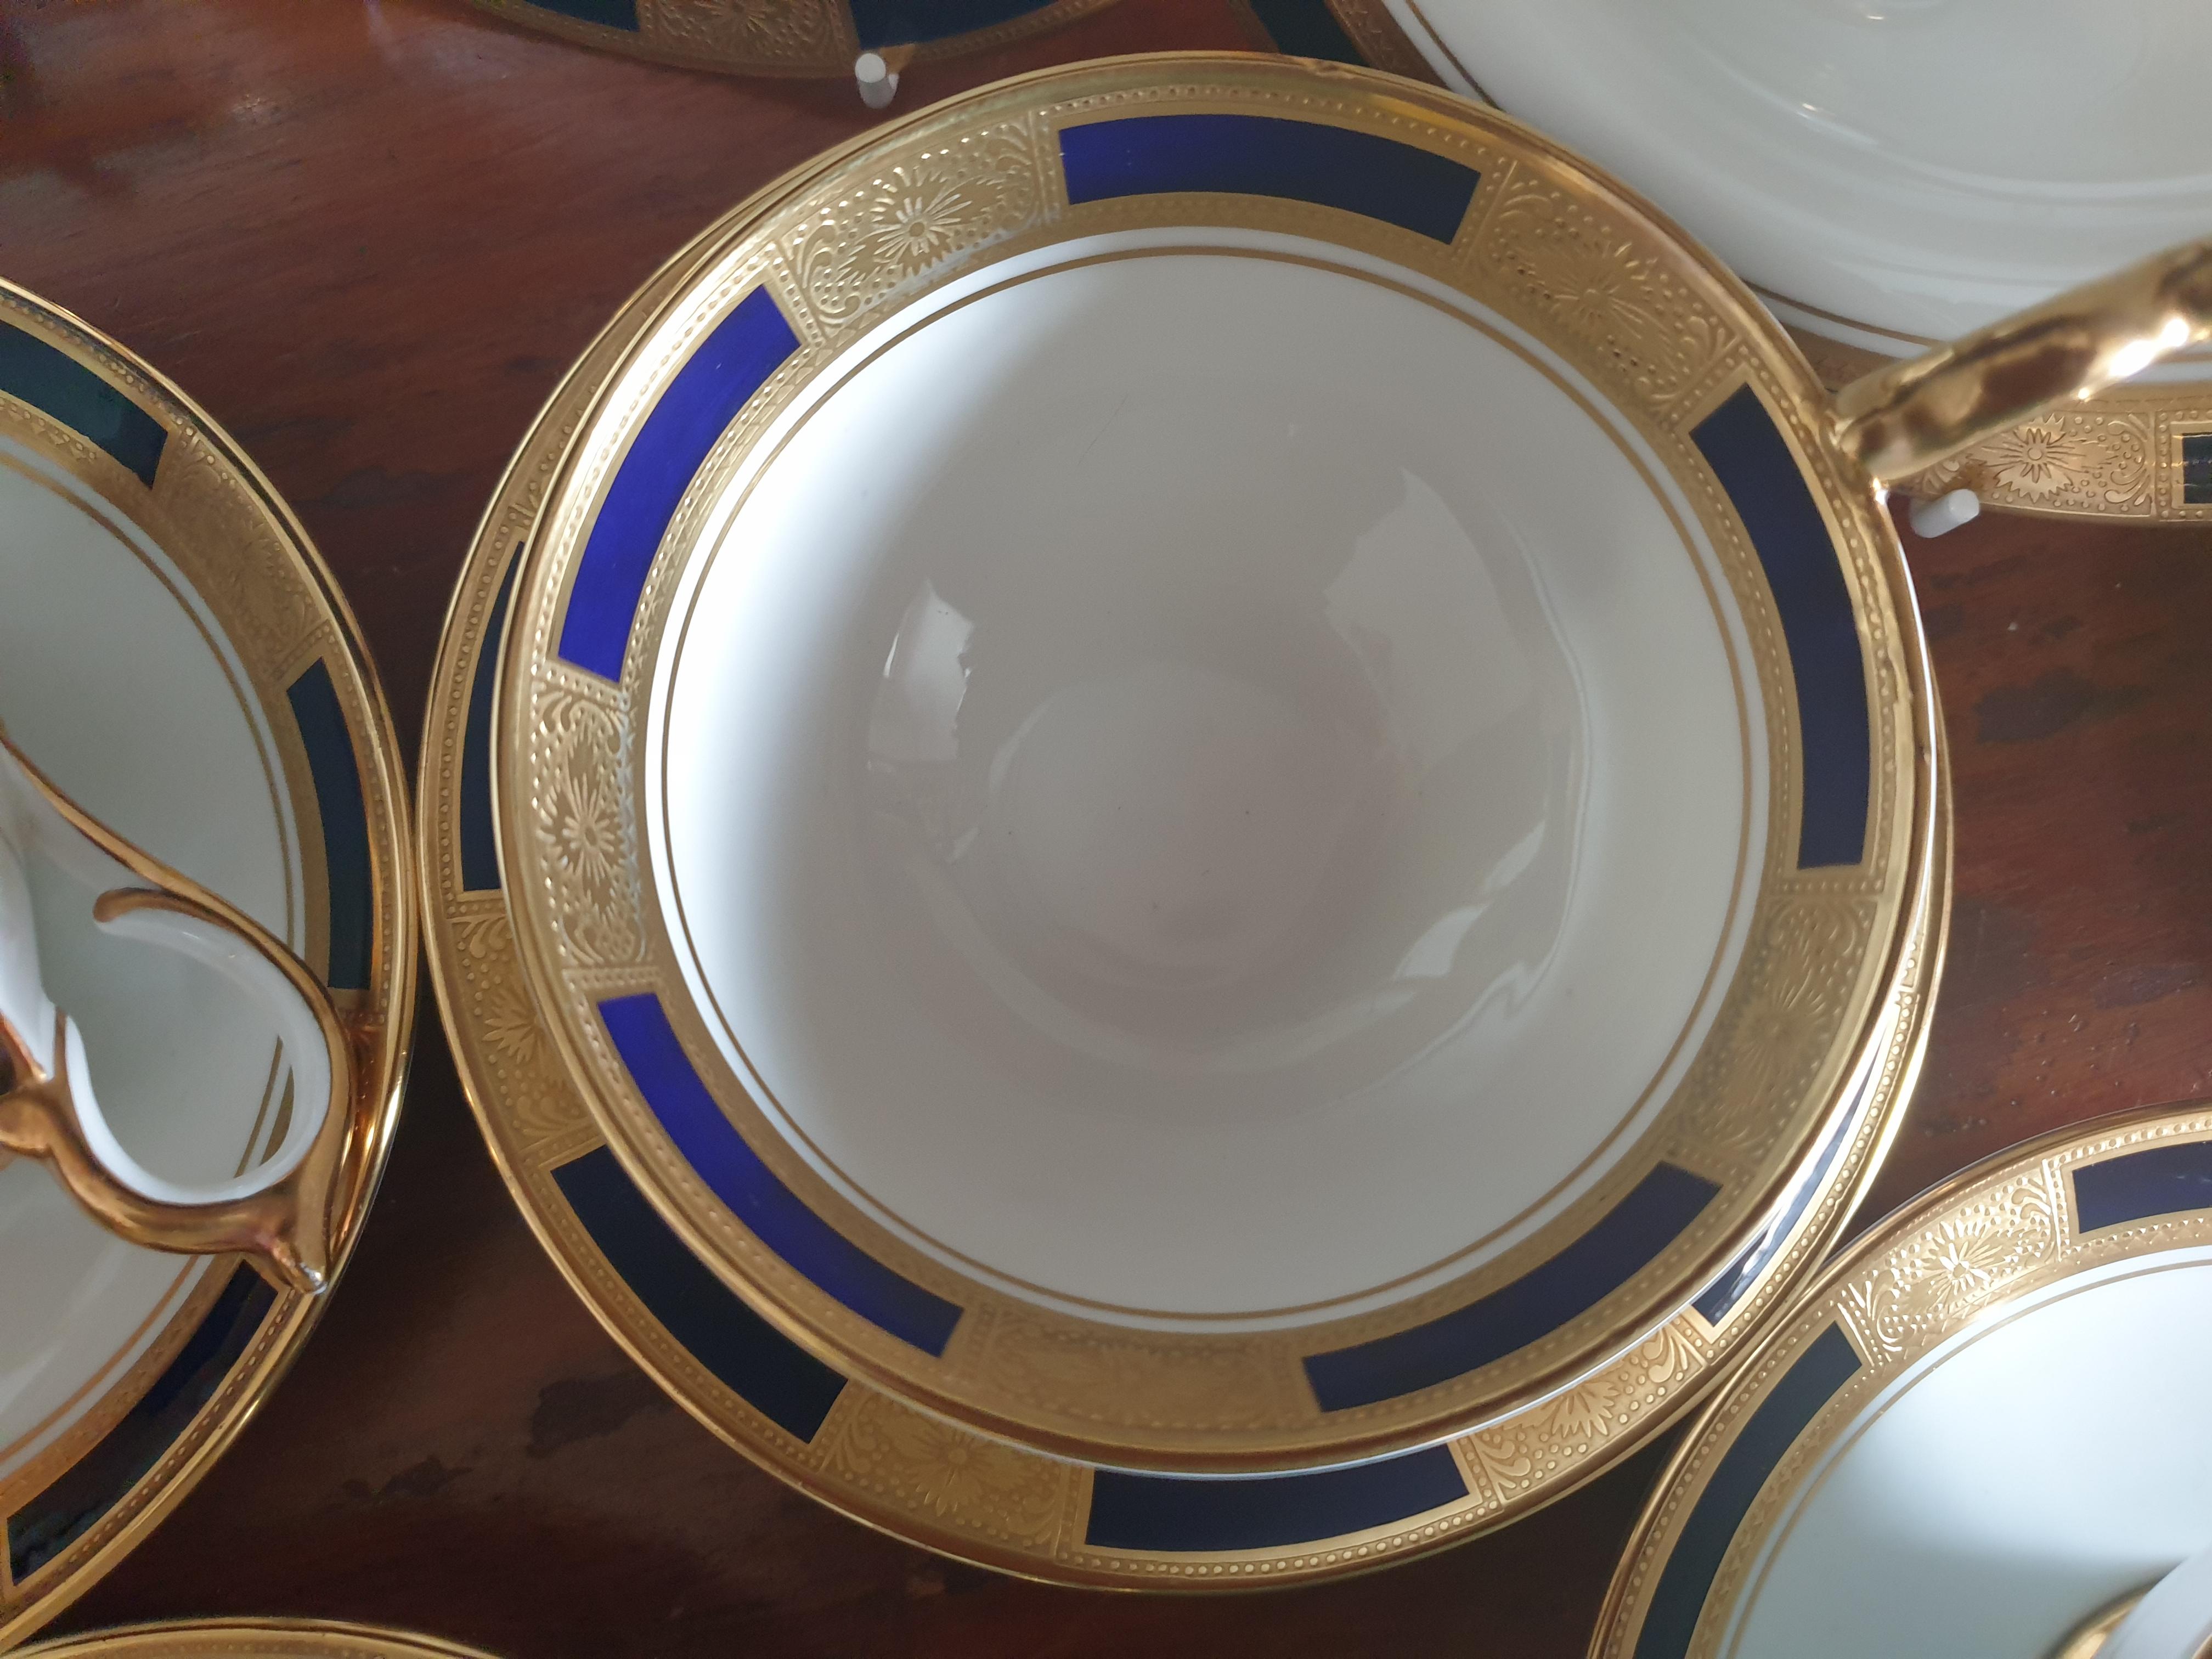 Aynsley English Bone China tea set empress patten cobalt consisting of 10 cups, 10 saucers and 10 side plates. Each piece richly gilded and in mint condition.